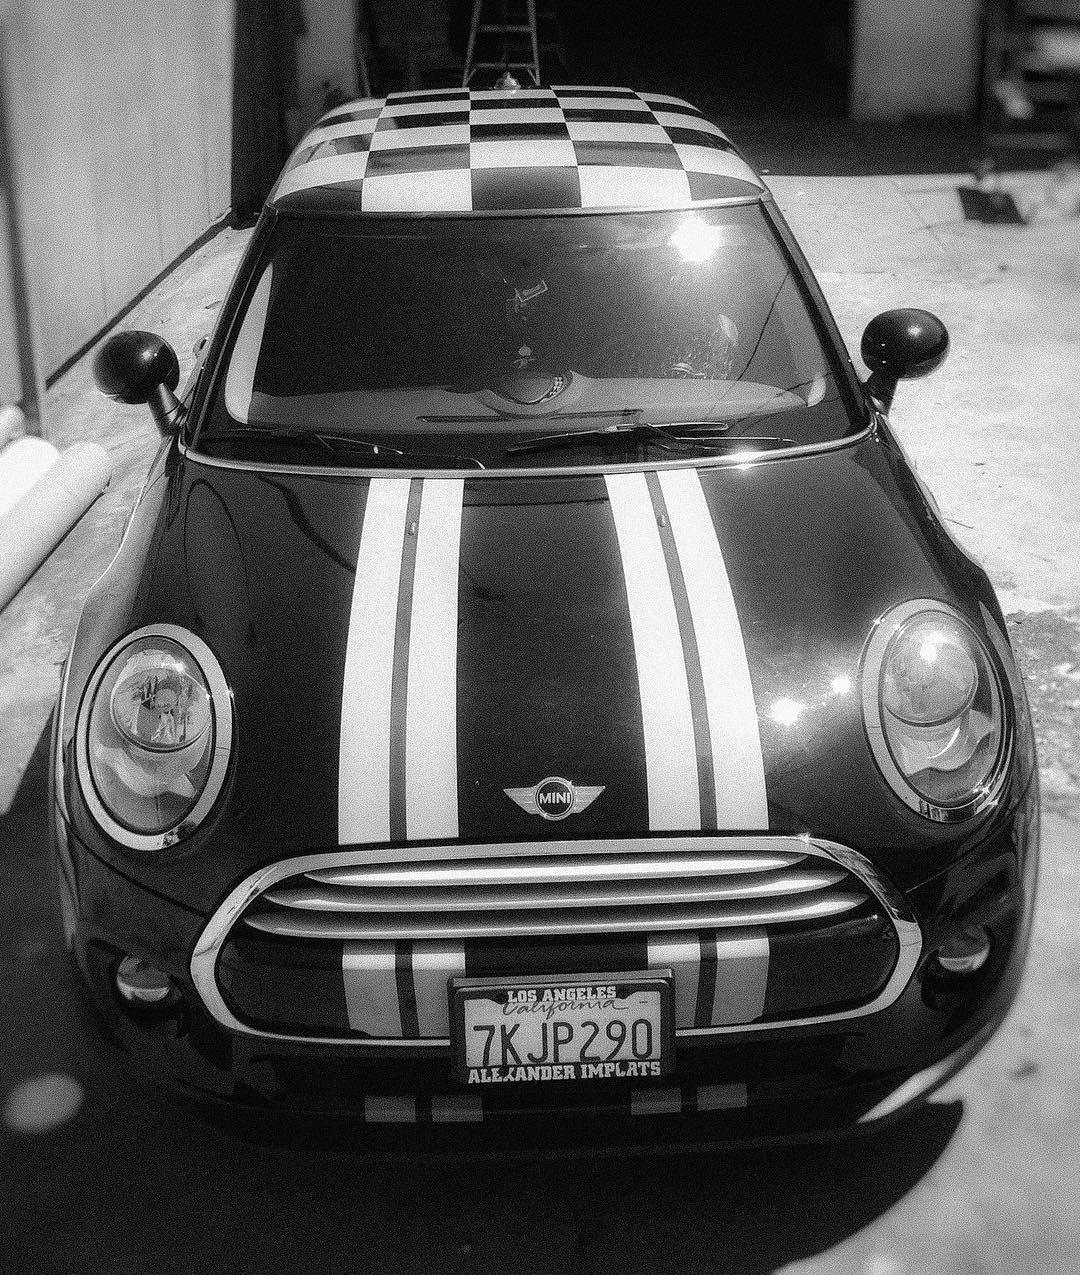 Leaving carwraps.com a little less #mini and a little more #meanie. #doyou #instagood #paintisdead #carwrap #losangeles #instadaily #socal